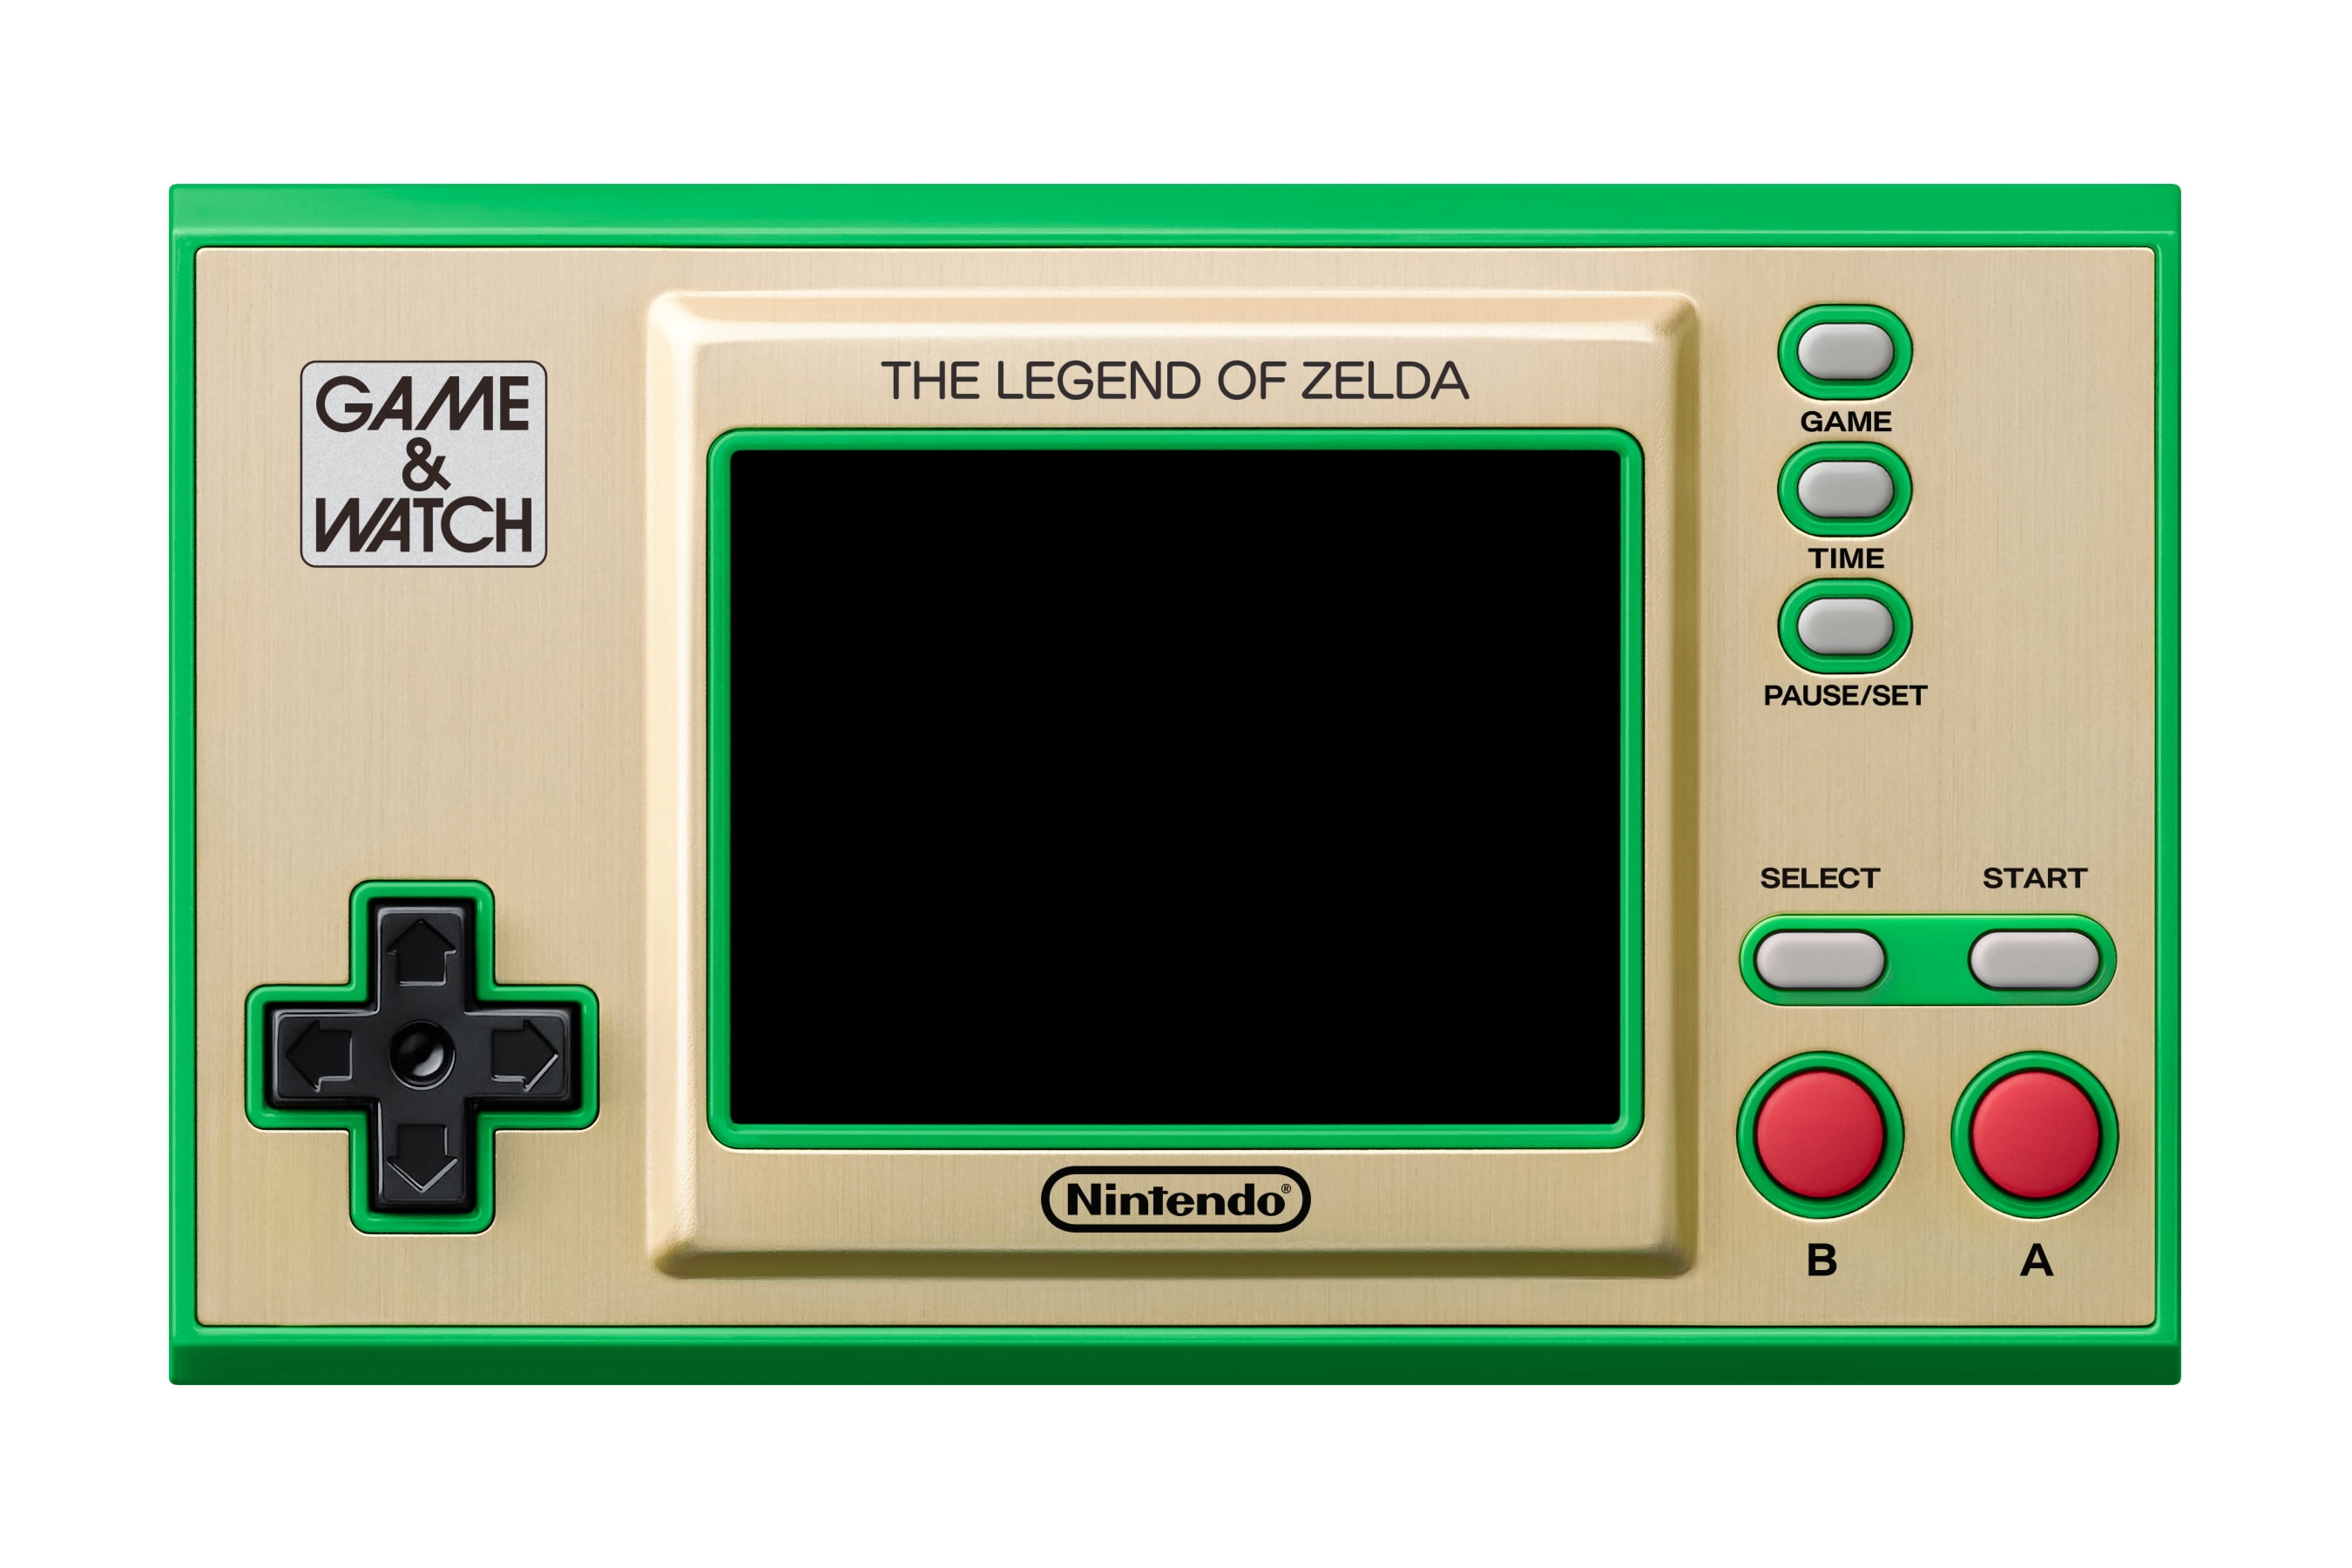 The Legend of Zelda: Get this classic Nintendo Switch game for 31% off -  Reviewed